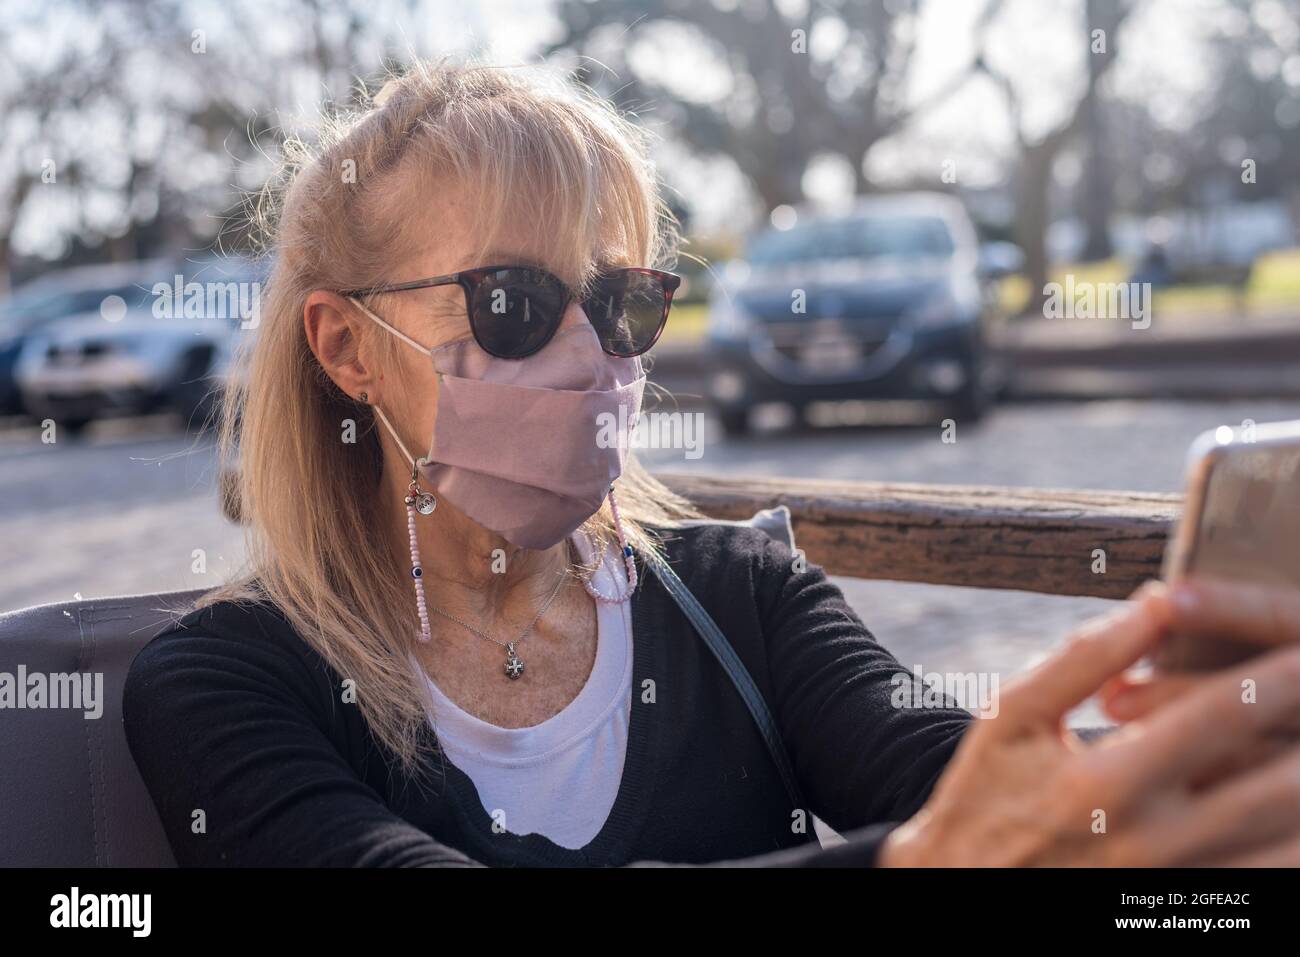 Mature adult woman smiling with glasses wearing face mask looking at smartphone. Stock Photo